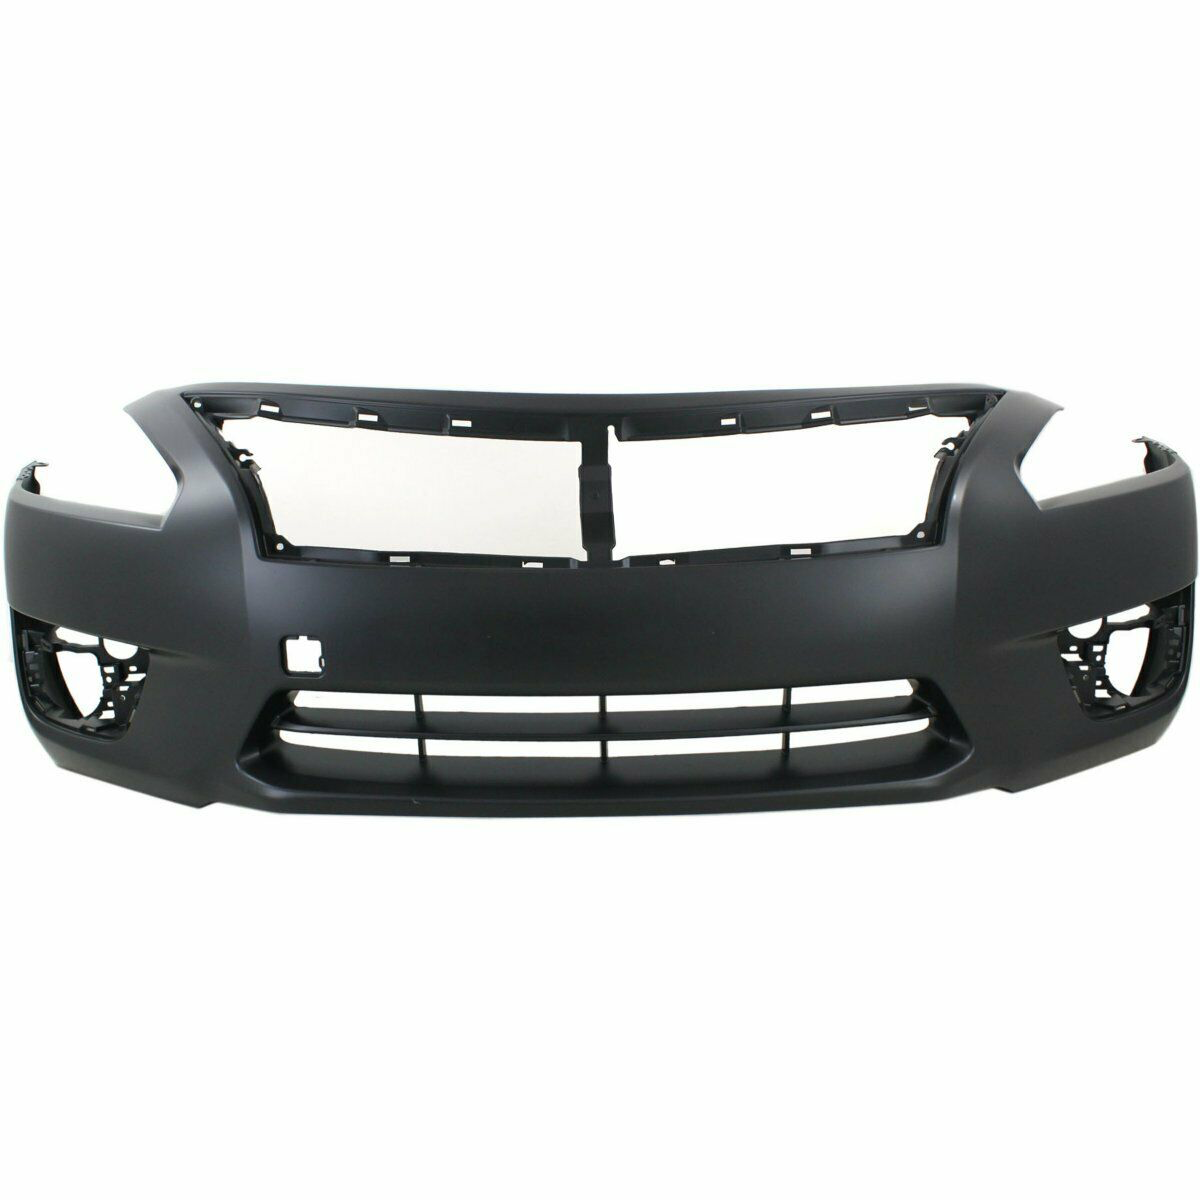 2013-2015 Nissan Altima Sedan Front Bumper Painted to Match